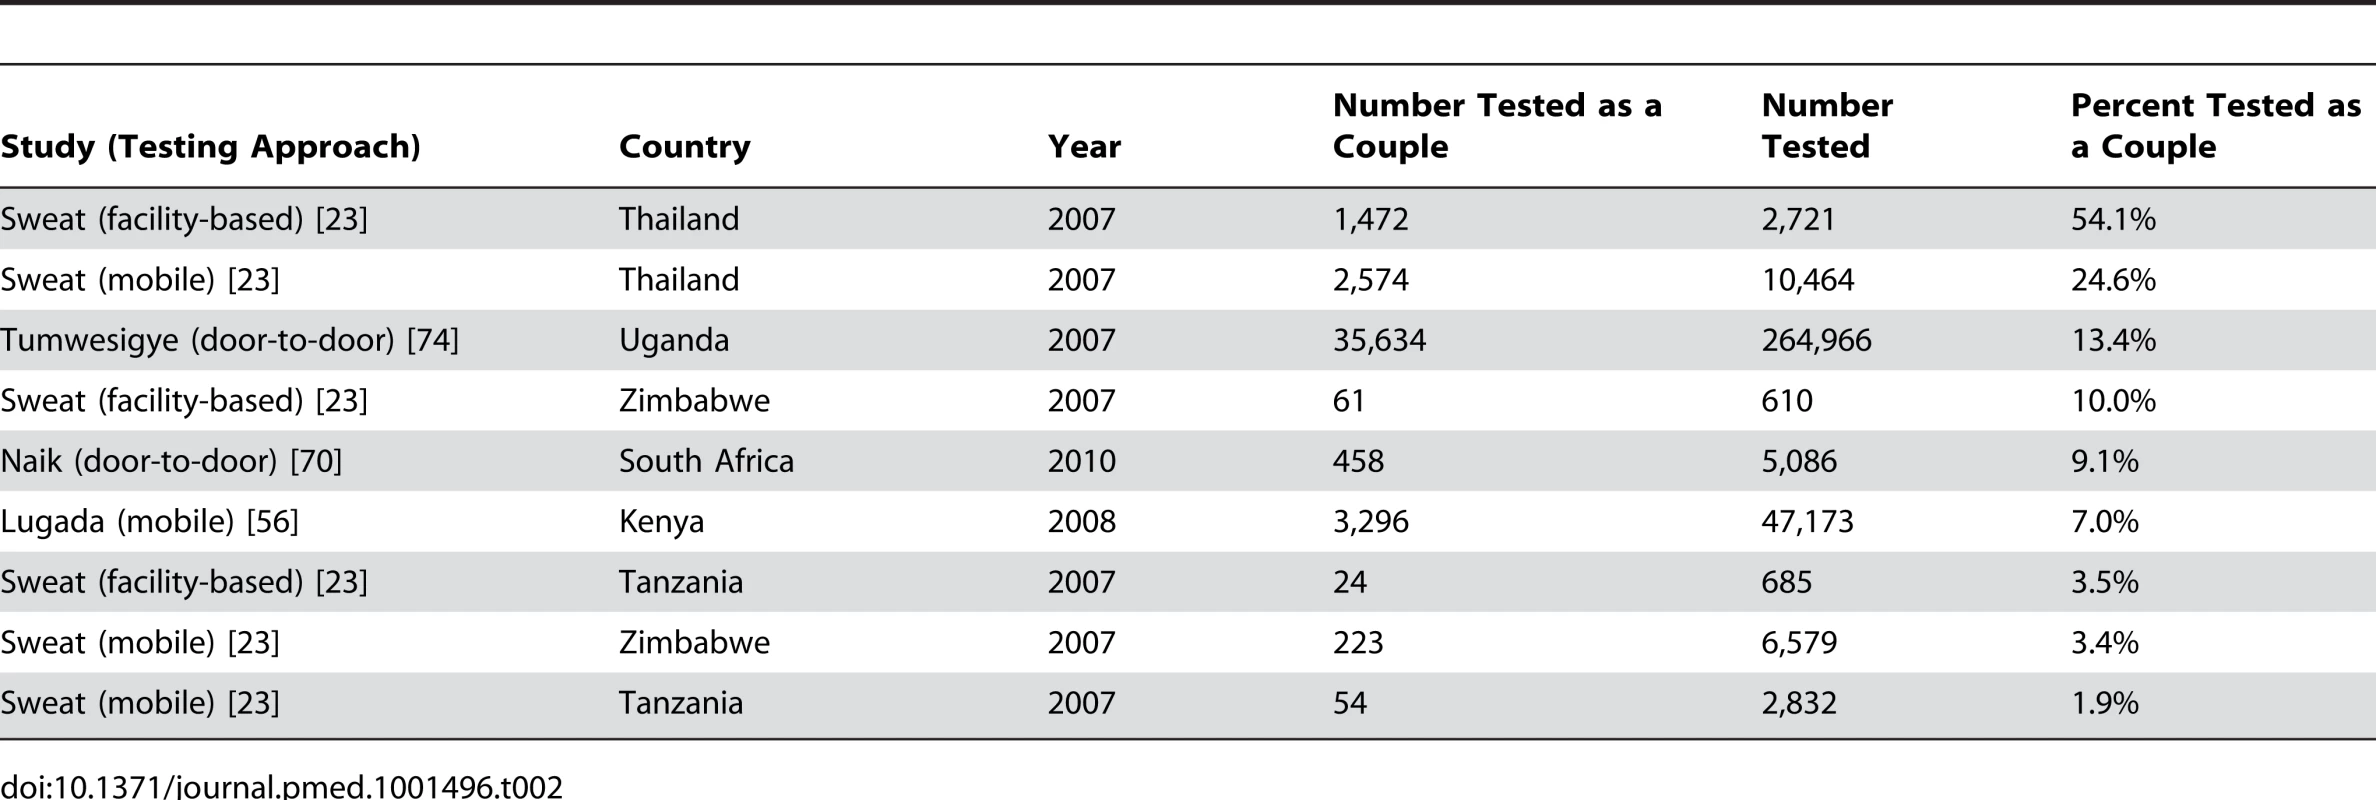 Percentage of clients received as couples in community-wide testing efforts.